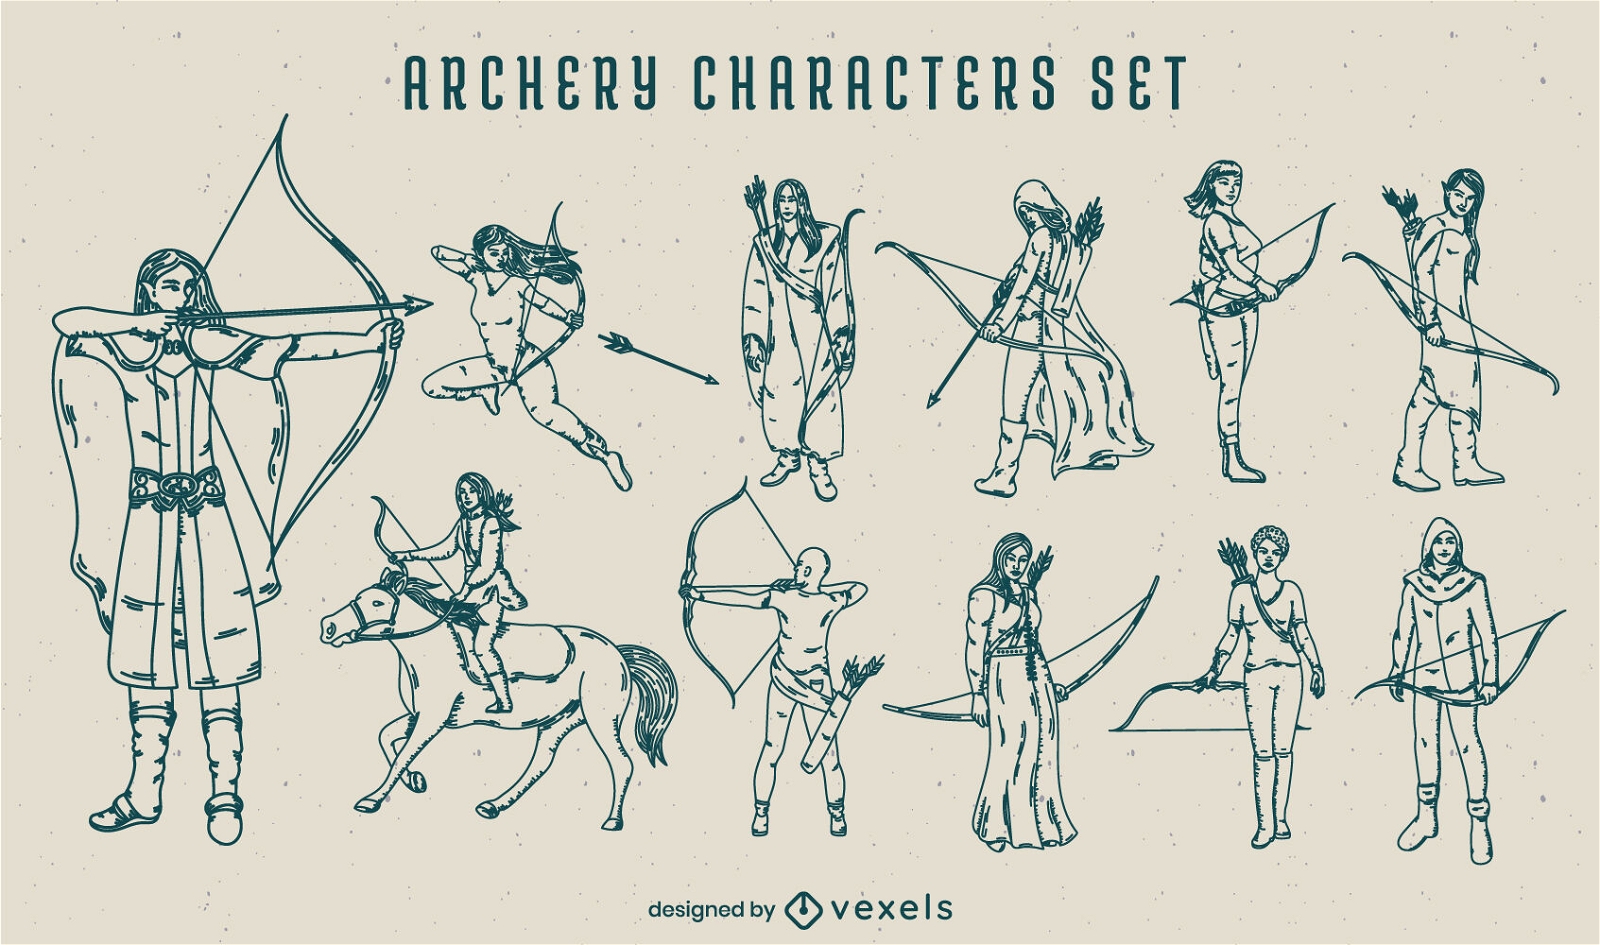 Archery characters hand drawn set